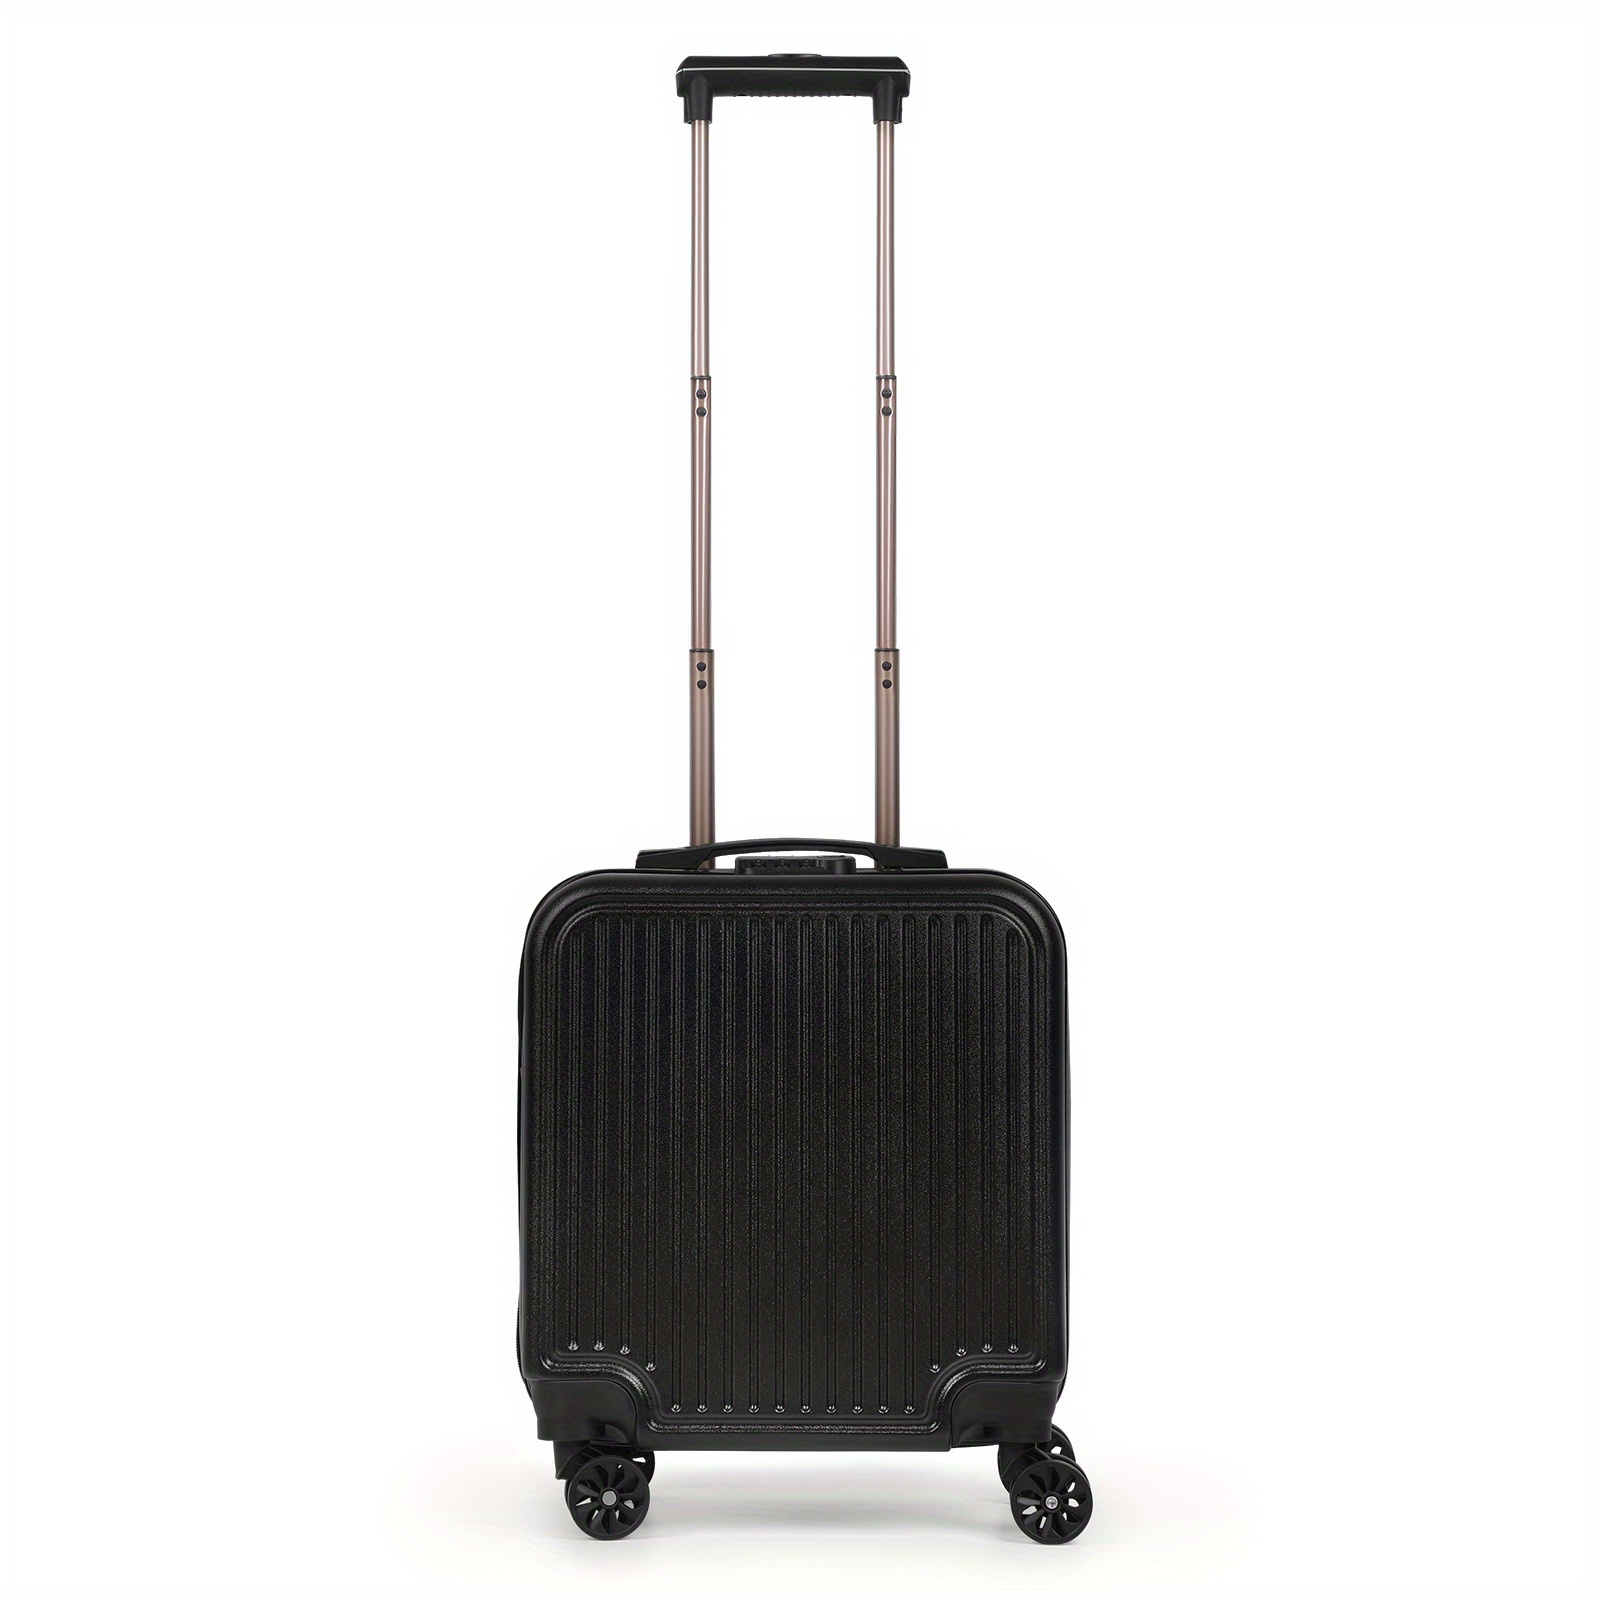 

Softside Expandable Carry On Luggage With Spinner Wheels, Lightweight Upright Suitcase, Rolling Travel Luggage For Woman